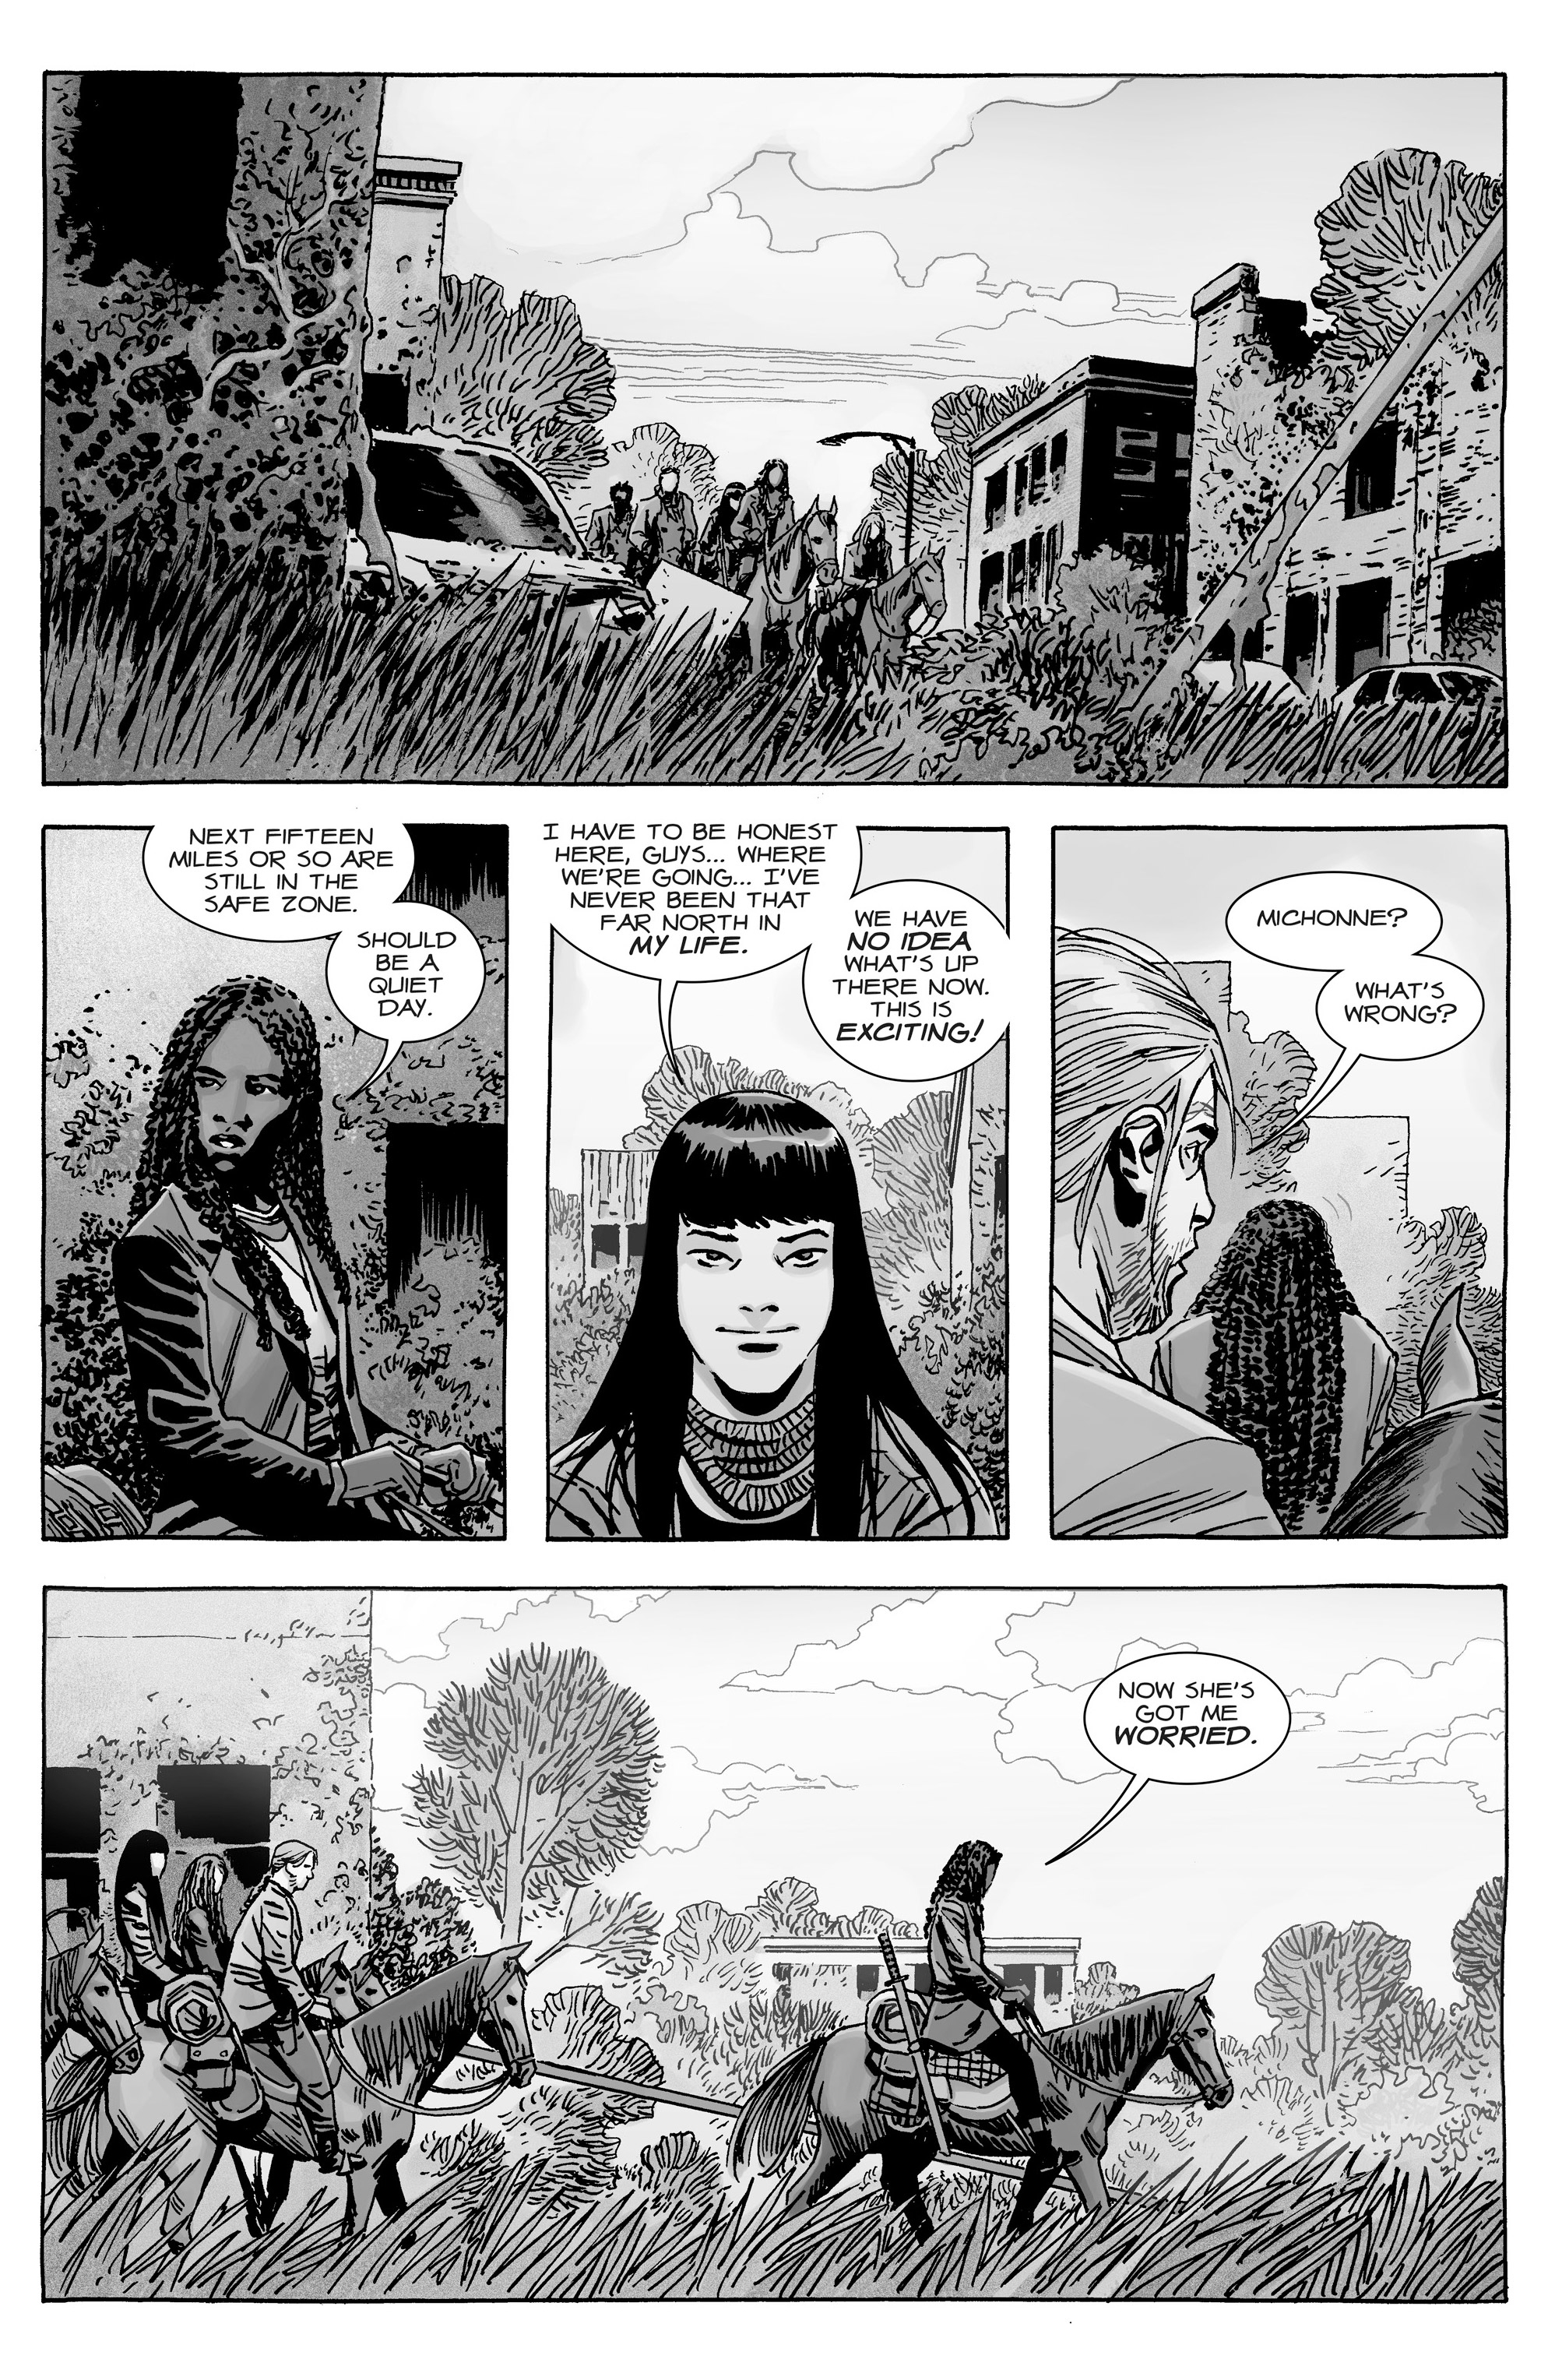 The Walking Dead (2003-): Chapter 170 - Page 3